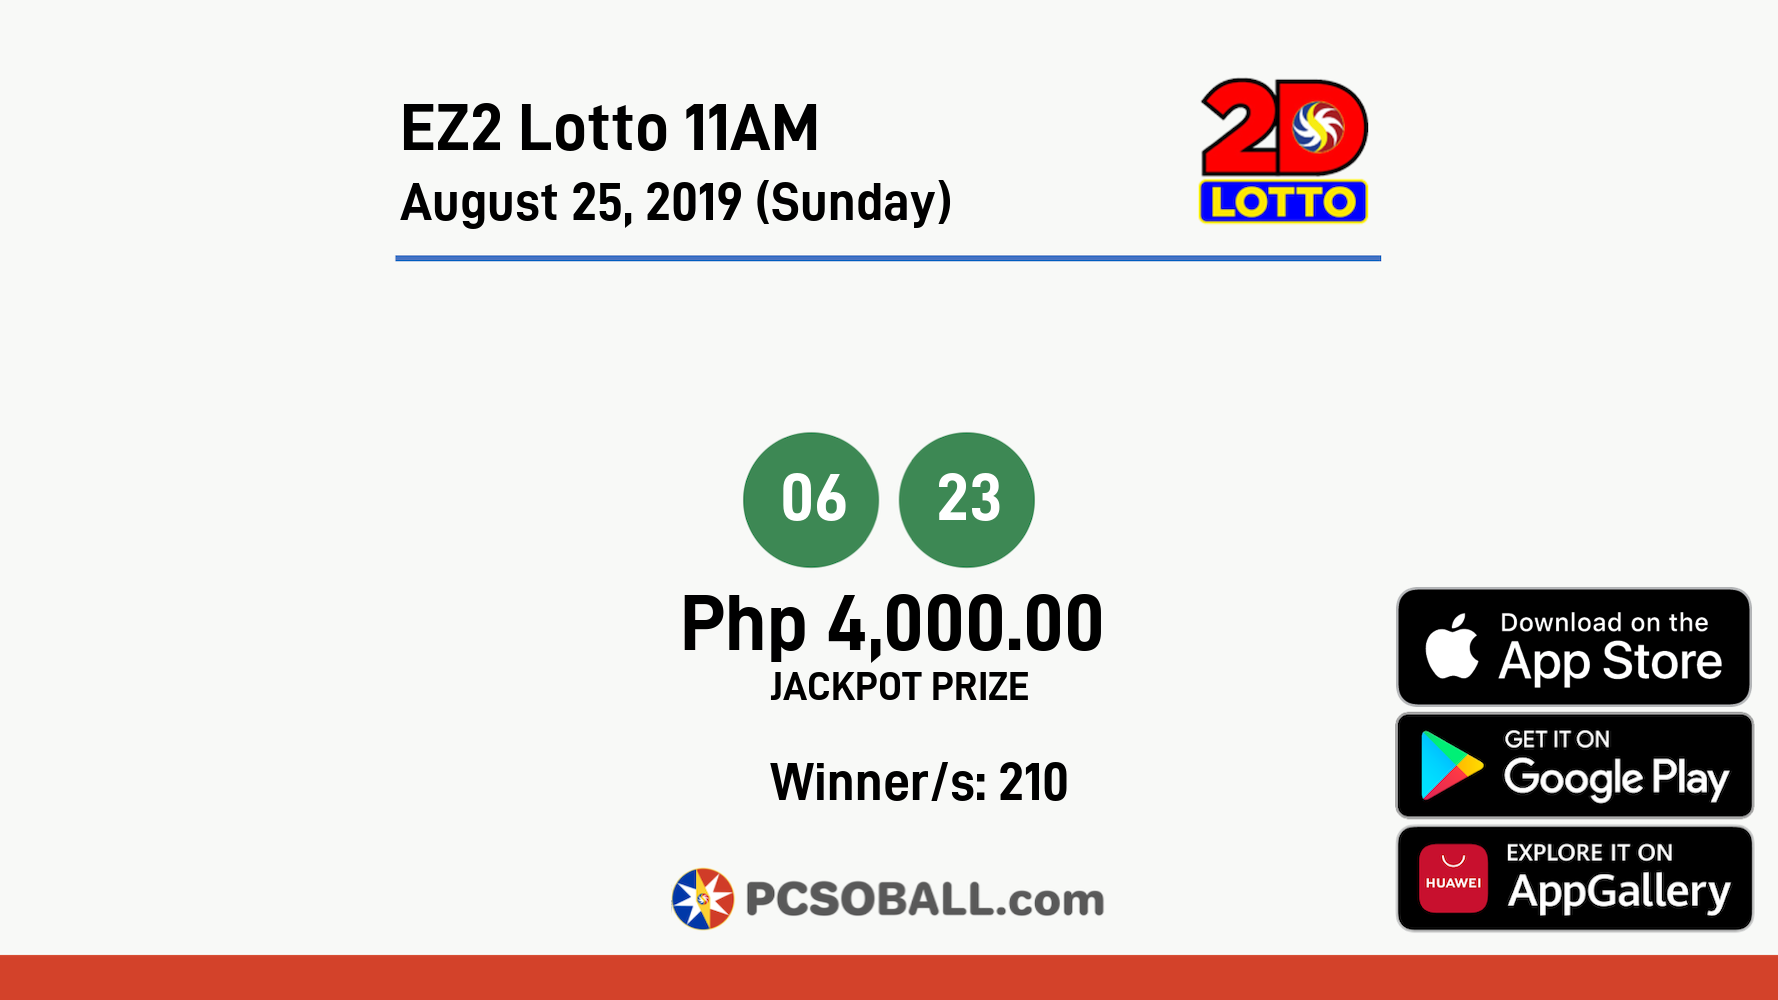 EZ2 Lotto 11AM August 25, 2019 (Sunday) Result